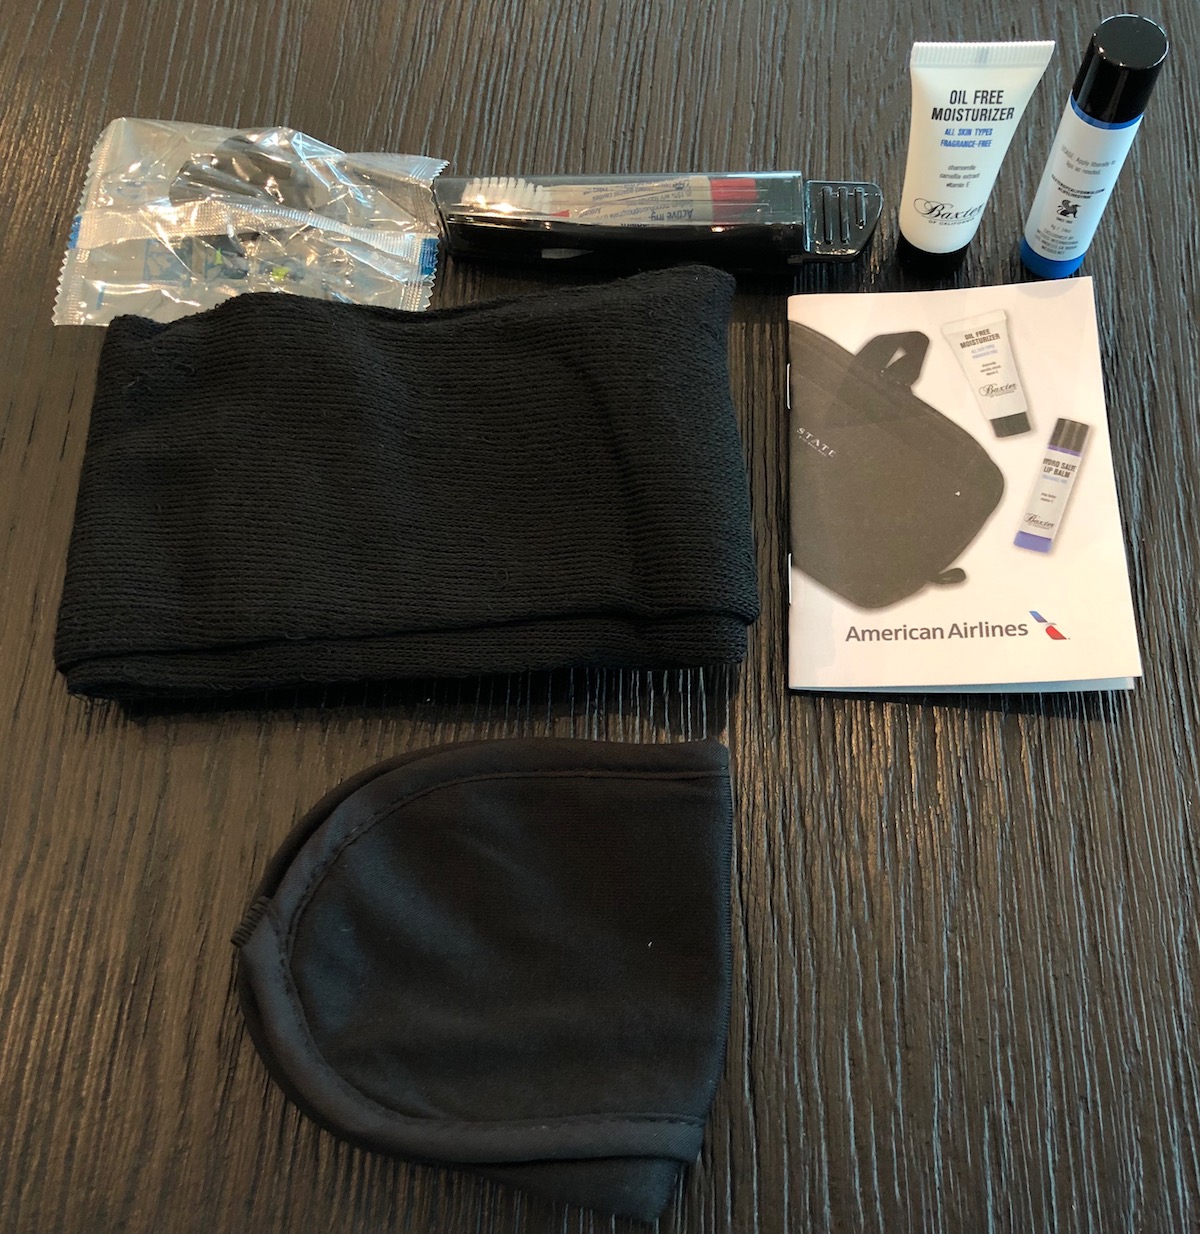 American Airlines Amenity Kit Review I One Mile At A Time